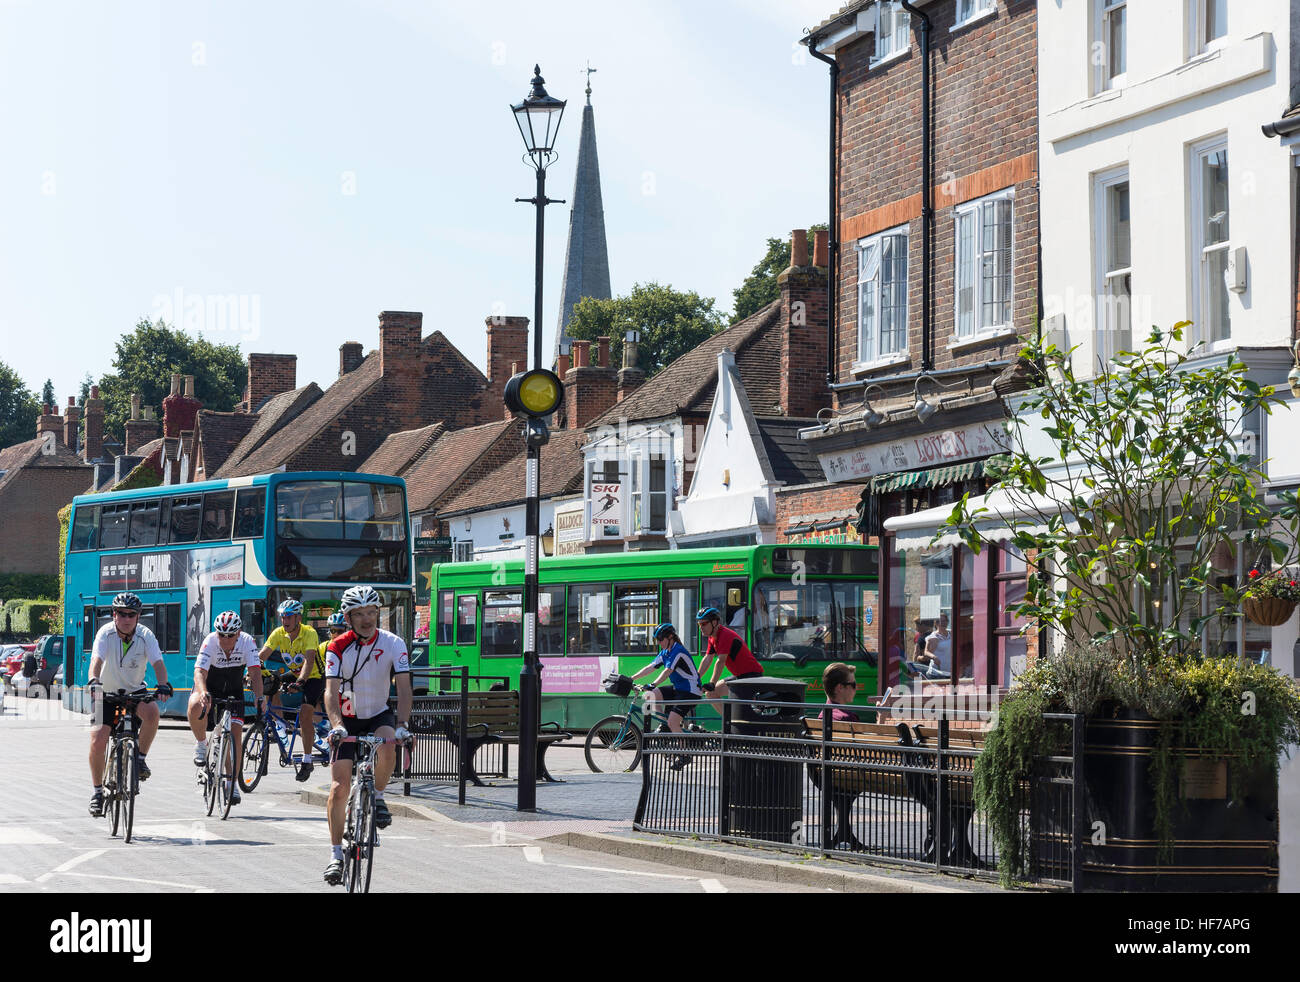 Group of cyclists on High Street, West Malling, Kent, England, United Kingdom Stock Photo